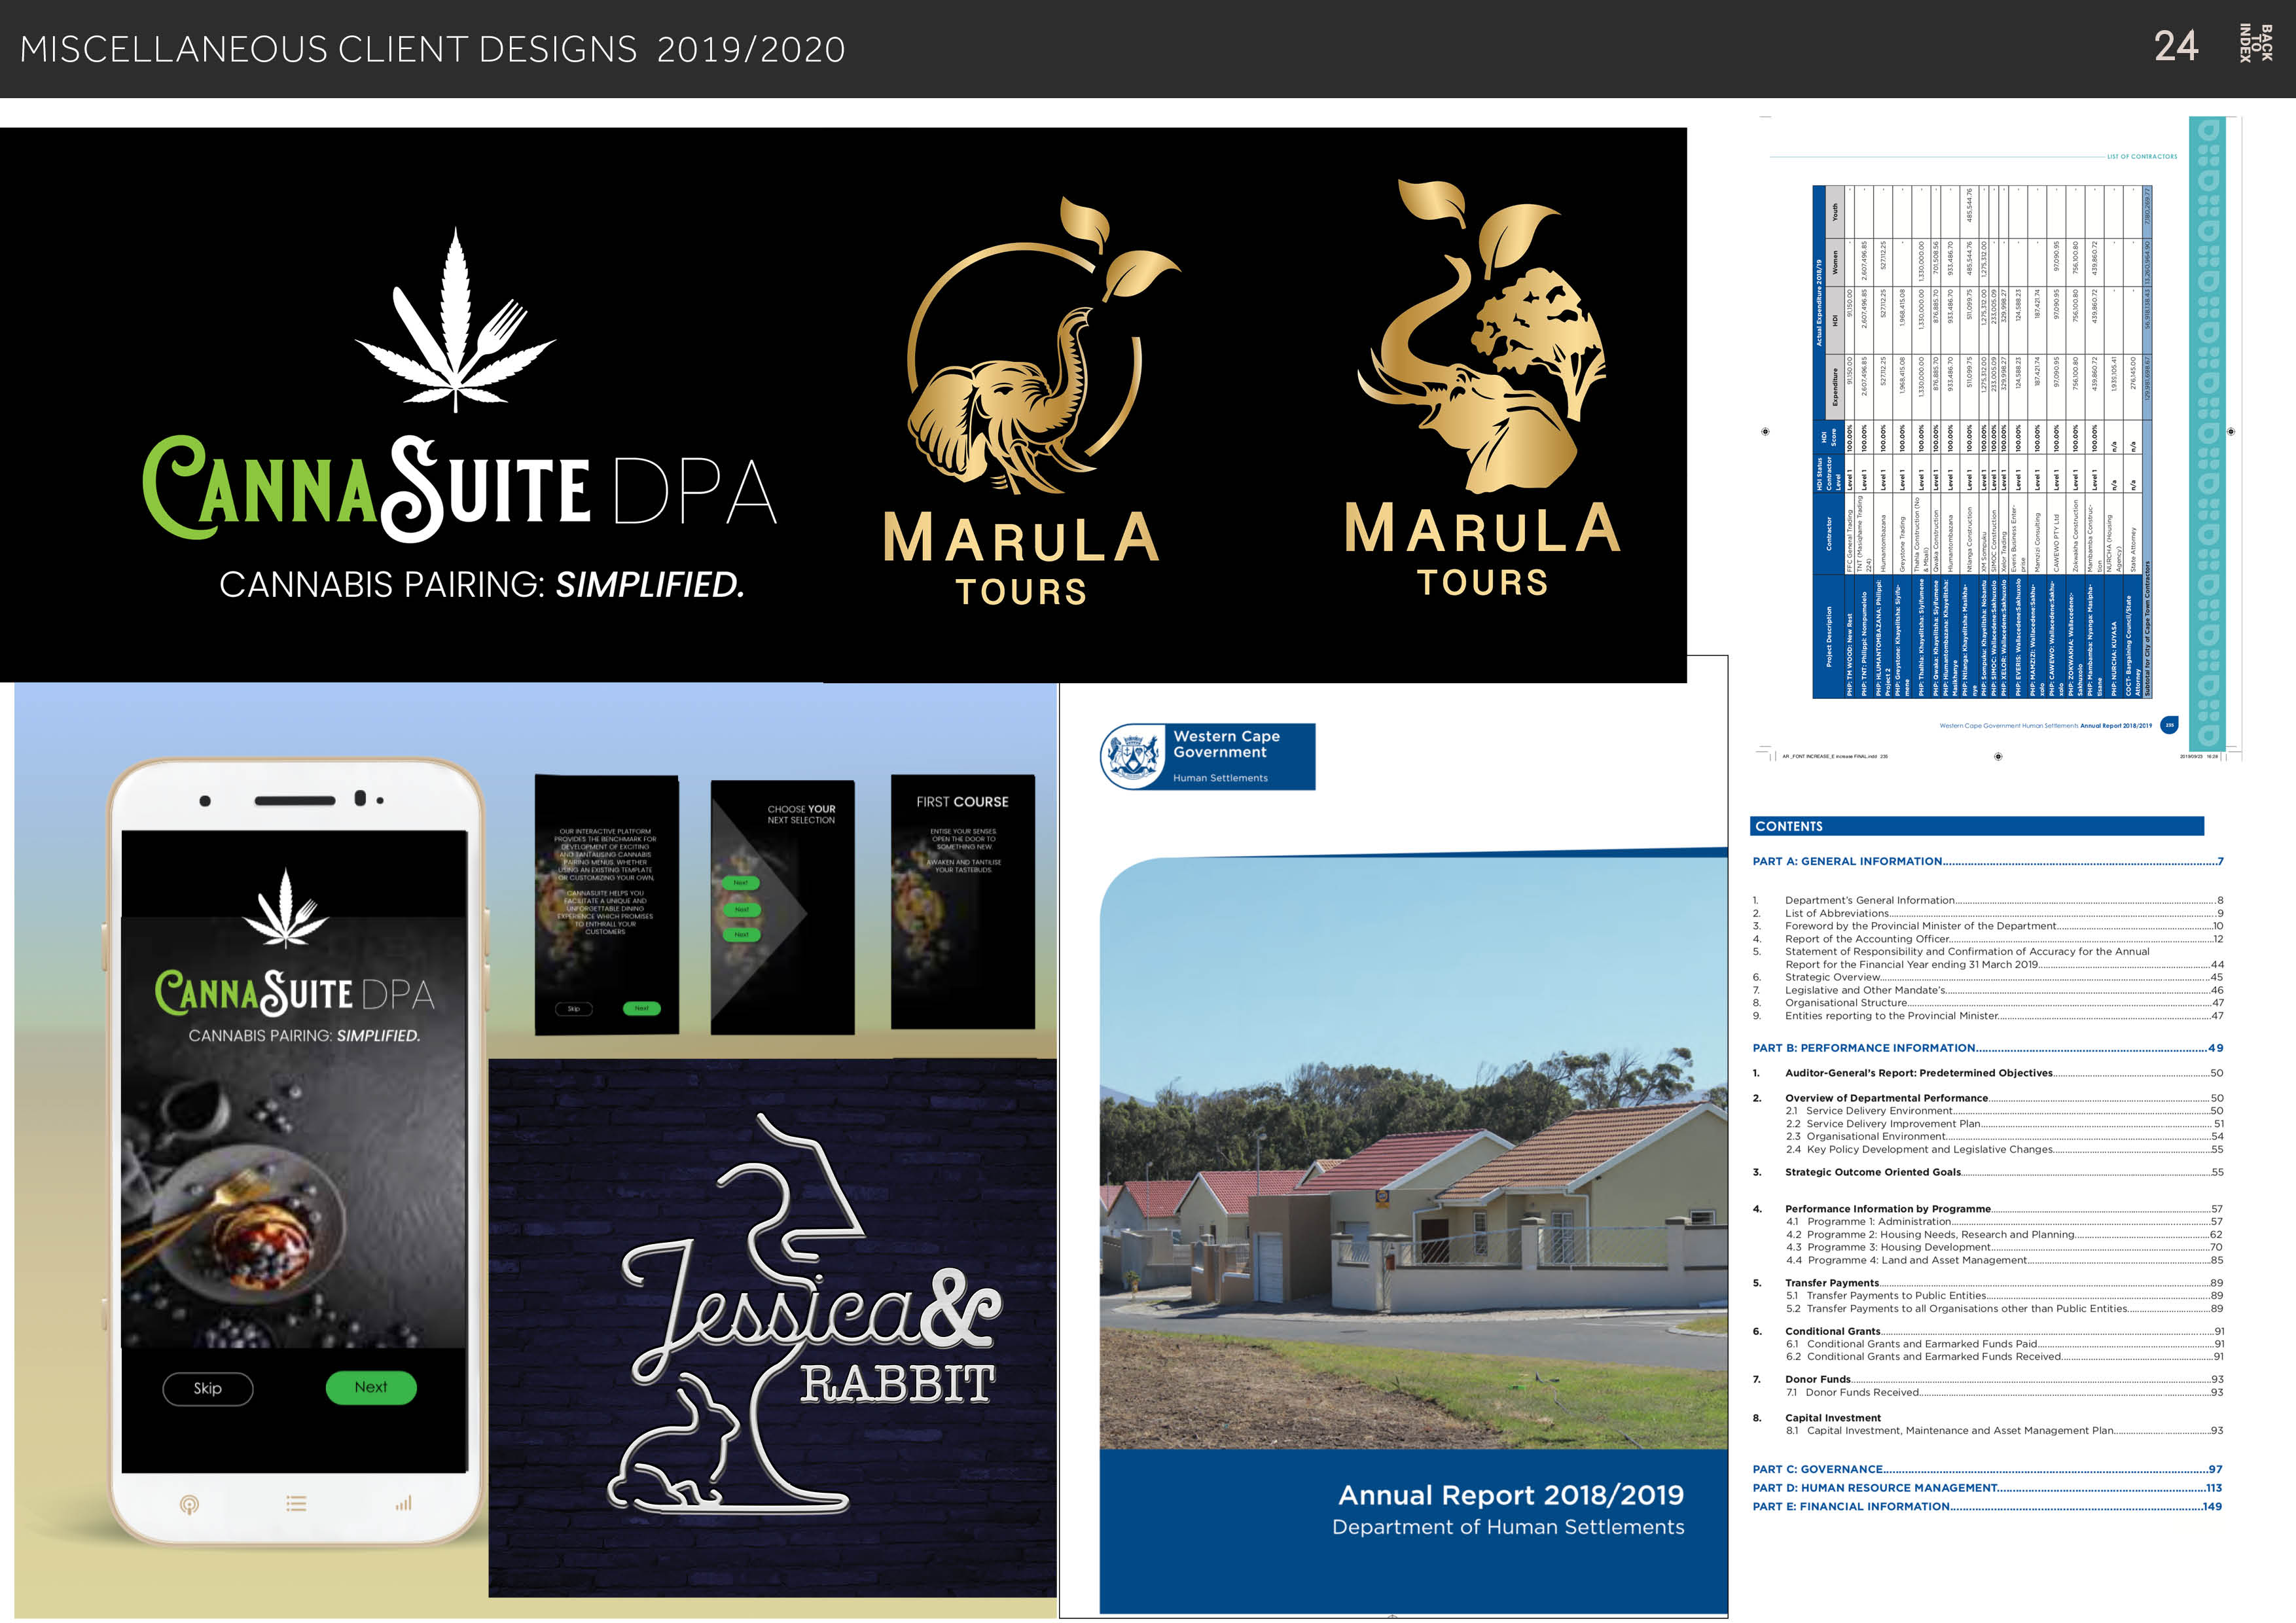 MISCELLANEOUS CLIENT DESIGNS 2019/2020 PY

\
ESA
CANNAQUITE DPA PVR rg)

CANNABIS PAIRING: SIMPLIFIED. TOURS TOURS

  

\

 
   

Western Cape
Government

        
 
     
   
 
    
     
 

   

RST COURSE
CONTENTS

PART A: GENERAL INFORMATION

CANNAQUITE DPA

CANNABIS PAIRING: SIMPLIFIED.

PART B: PERFORMANCE INFORMATION

1 Auditor-General's Report: Predetermined Objectives.

    

® 2. Overview of D ntal Performance

)

) 4 3 ; \ = ~ Strategic Outcome Oriented Goals.
» yu = ) | WE S # fs => _
4 , 4 A 5 Performance Information by Programme
we

> |
LJ
=i

  

Capital Investment

PART C: GOVERNANCE

Annual Report 201 8/2019 PART D: HUMAN RESOURCE MANAGEMENT.

PART E: FINANCIAL INFORMATION.
Department of Human Settlements